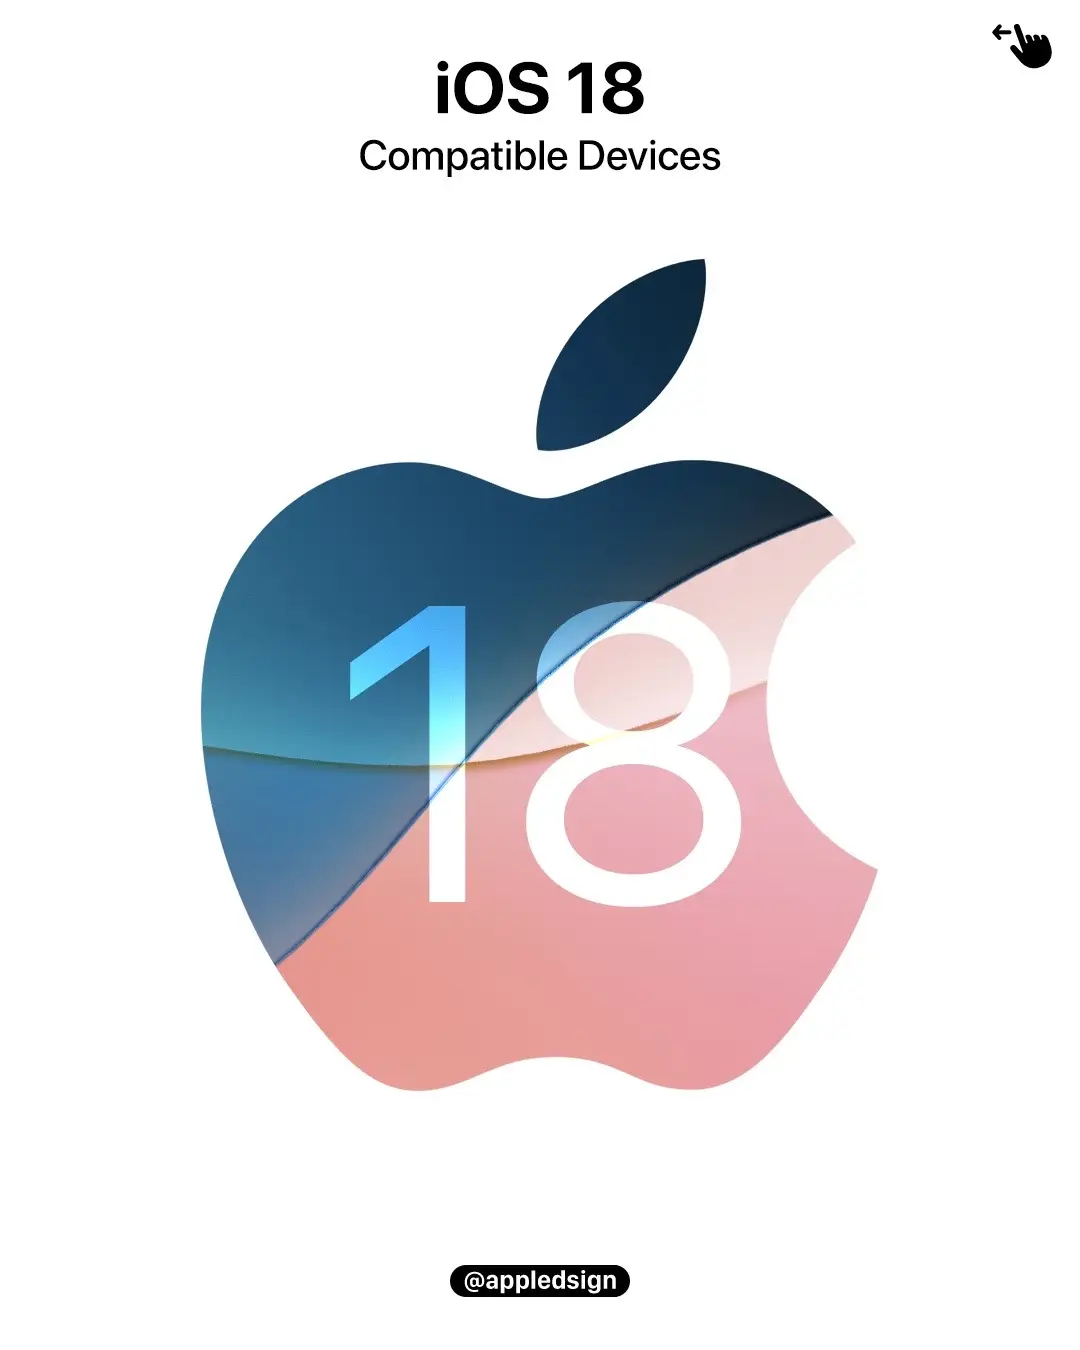 Is your iPhone ready for the next big update? #ios18 #ios18compatibledevices #iphoneupdate #iphone16 #iphone16pro #refinedsign 